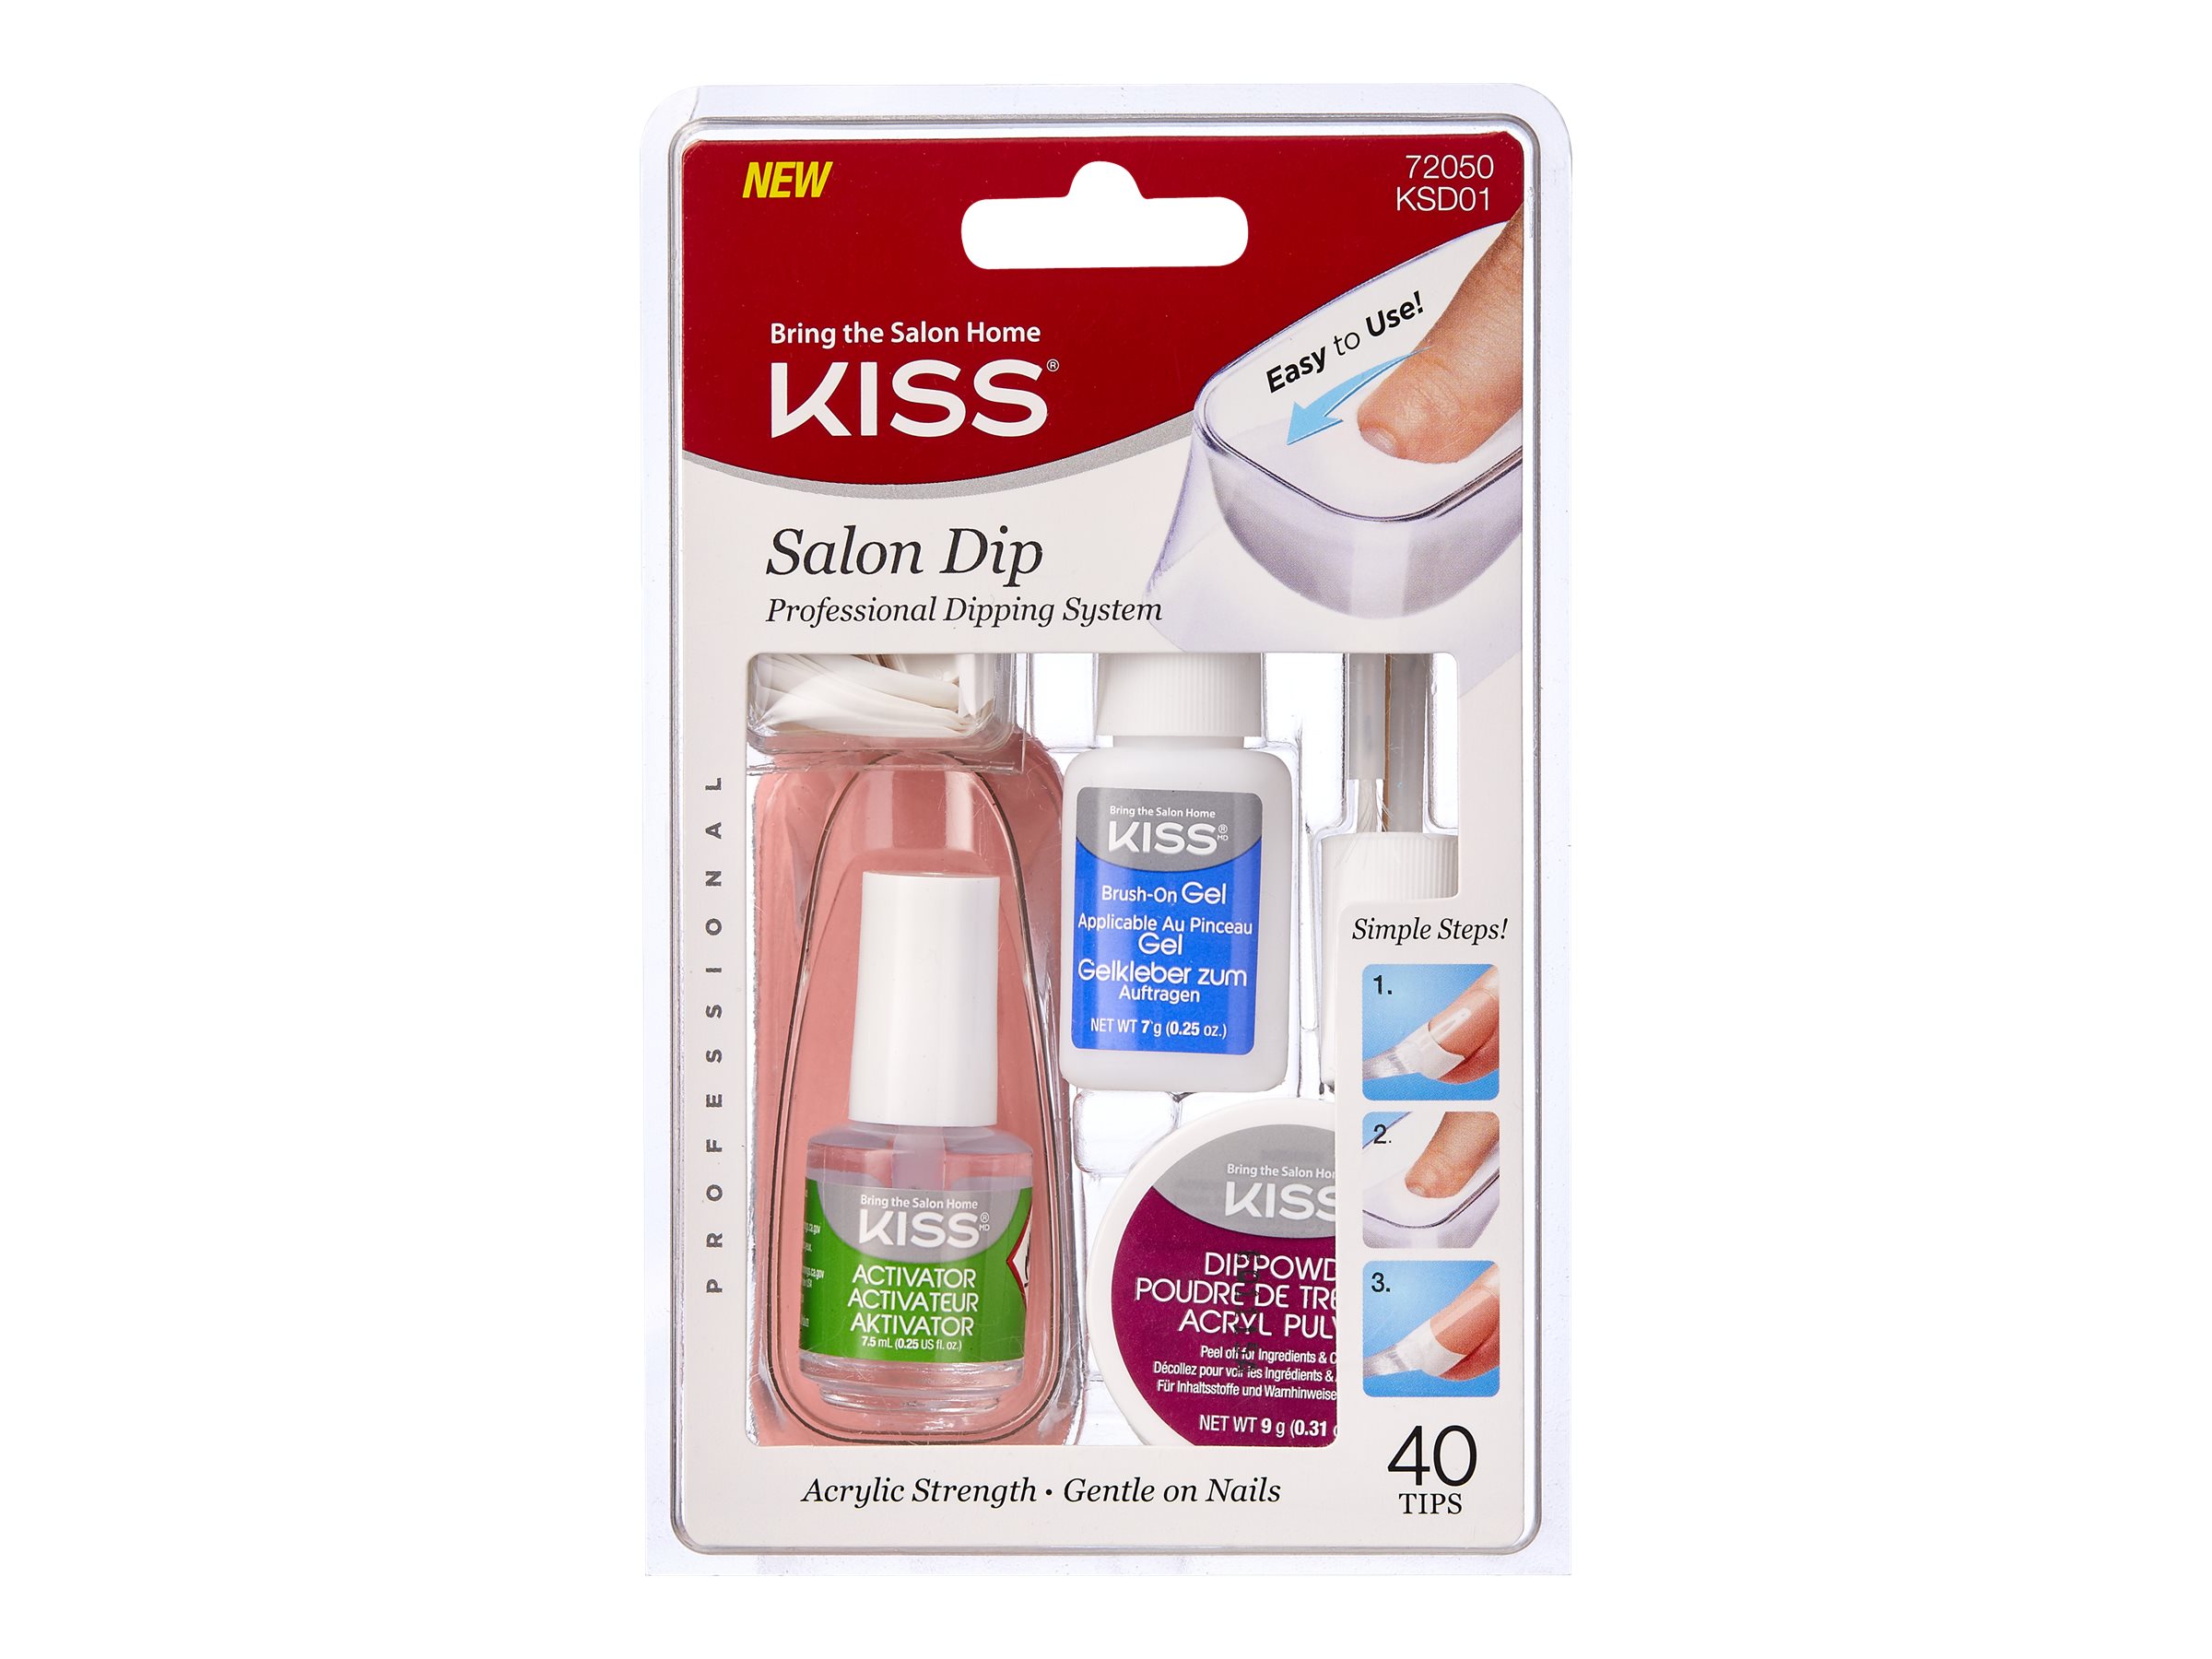 3. KISS Salon Dip Professional Dipping System - French Wrap - wide 2